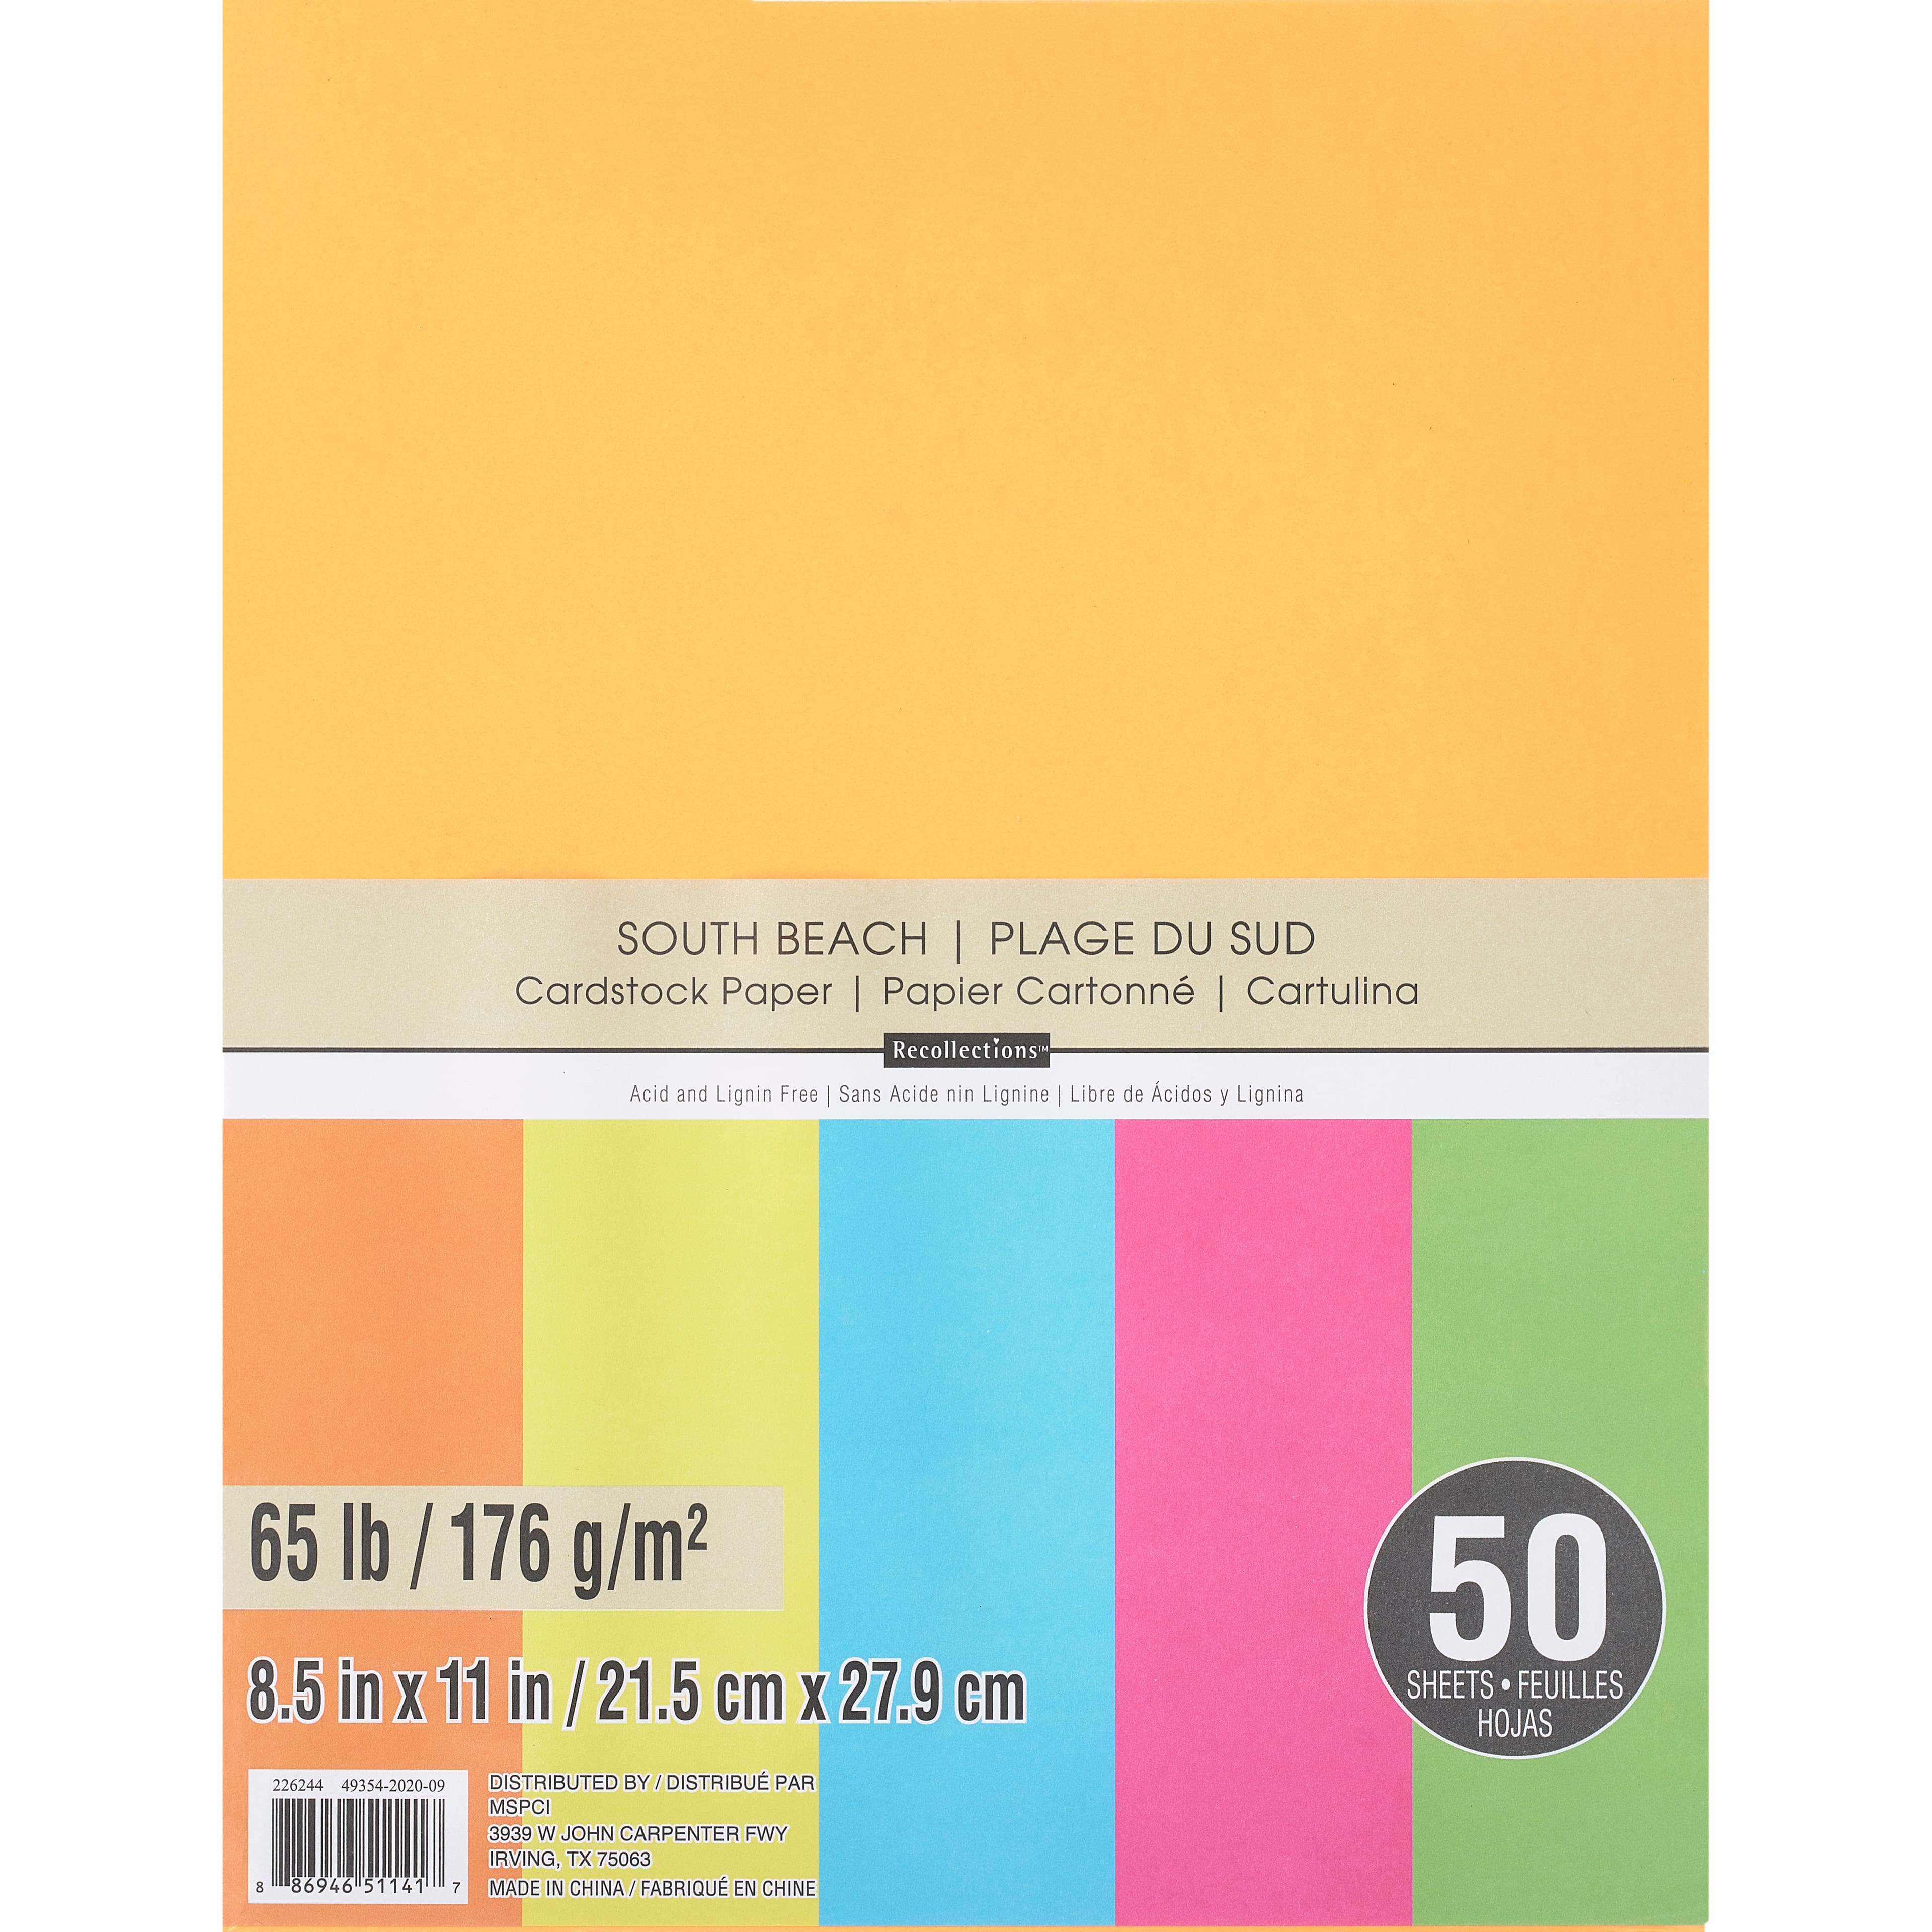 8.5 x 11 Cardstock Paper by Recollections 50 Sheets in Grey Kraft | Michaels